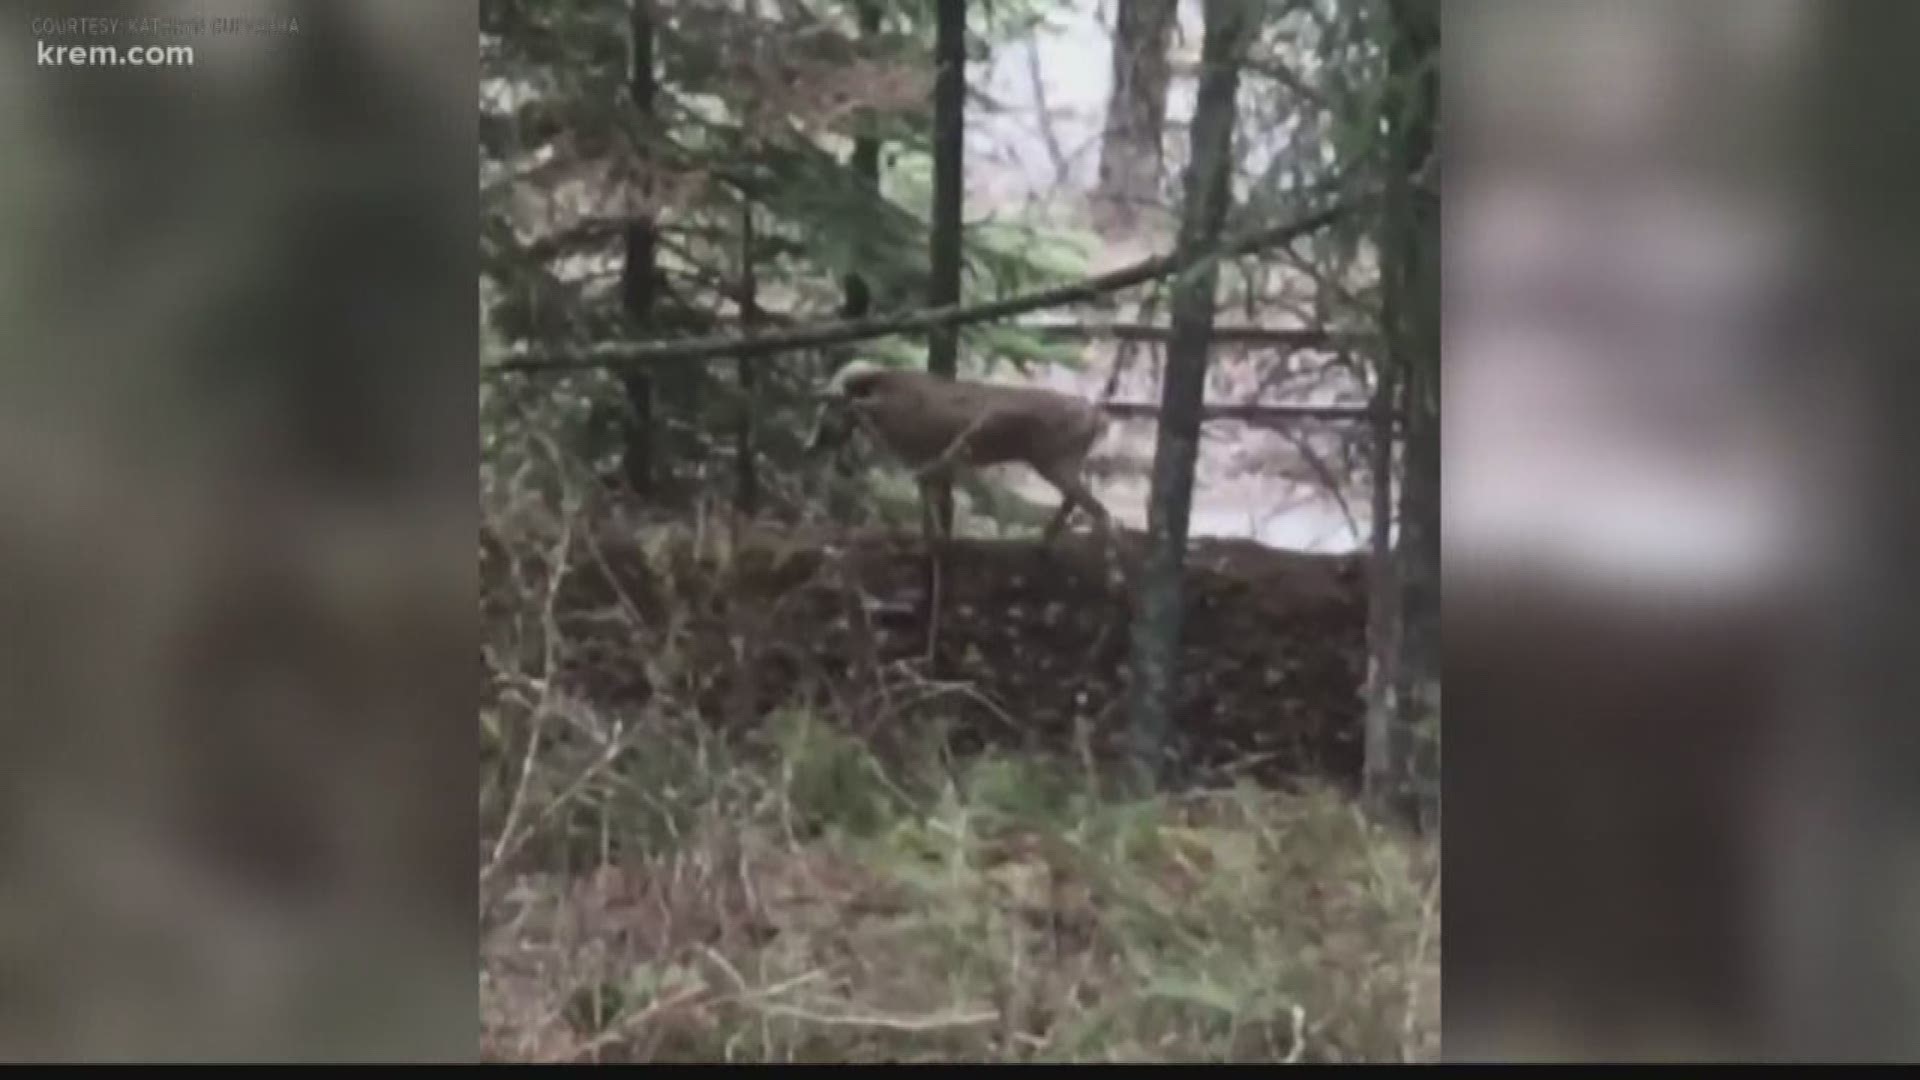 Idaho Fish and Game says they're aware of the deer and game officers have been keeping an eye on her. They too say she appears to be healthy and has given birth.